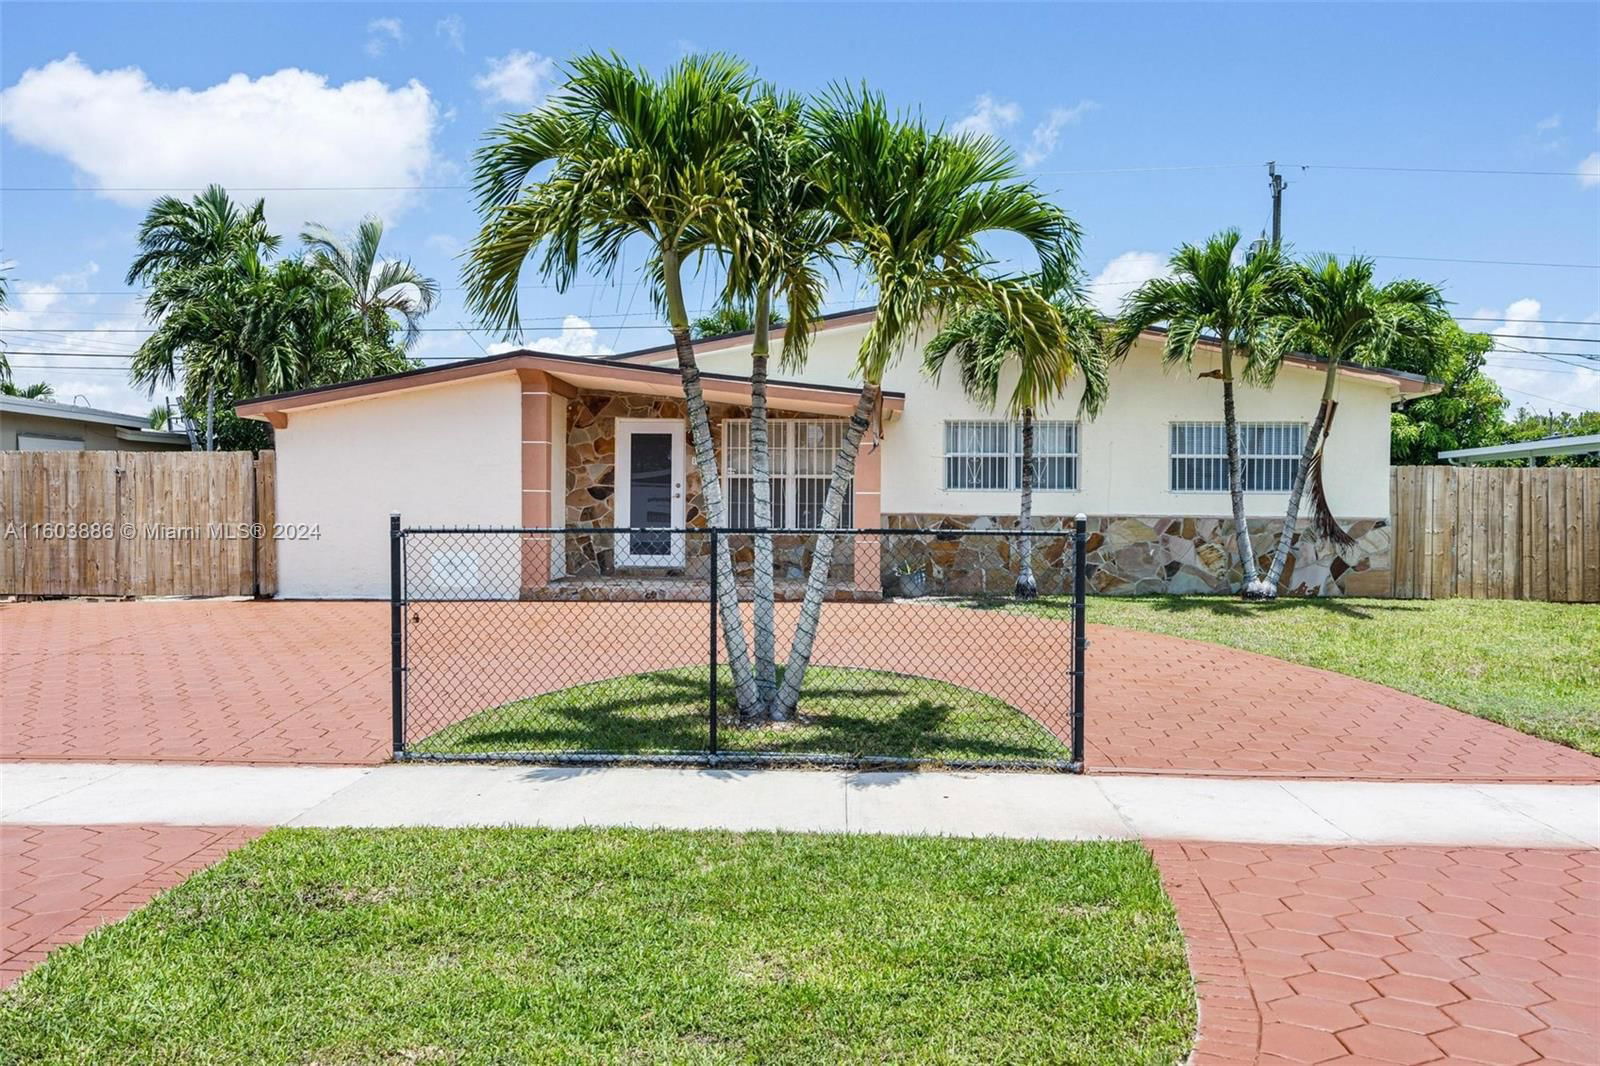 Real estate property located at 12615 185th Ter, Miami-Dade County, SO MIAMI HEIGHTS ADDN D, Miami, FL